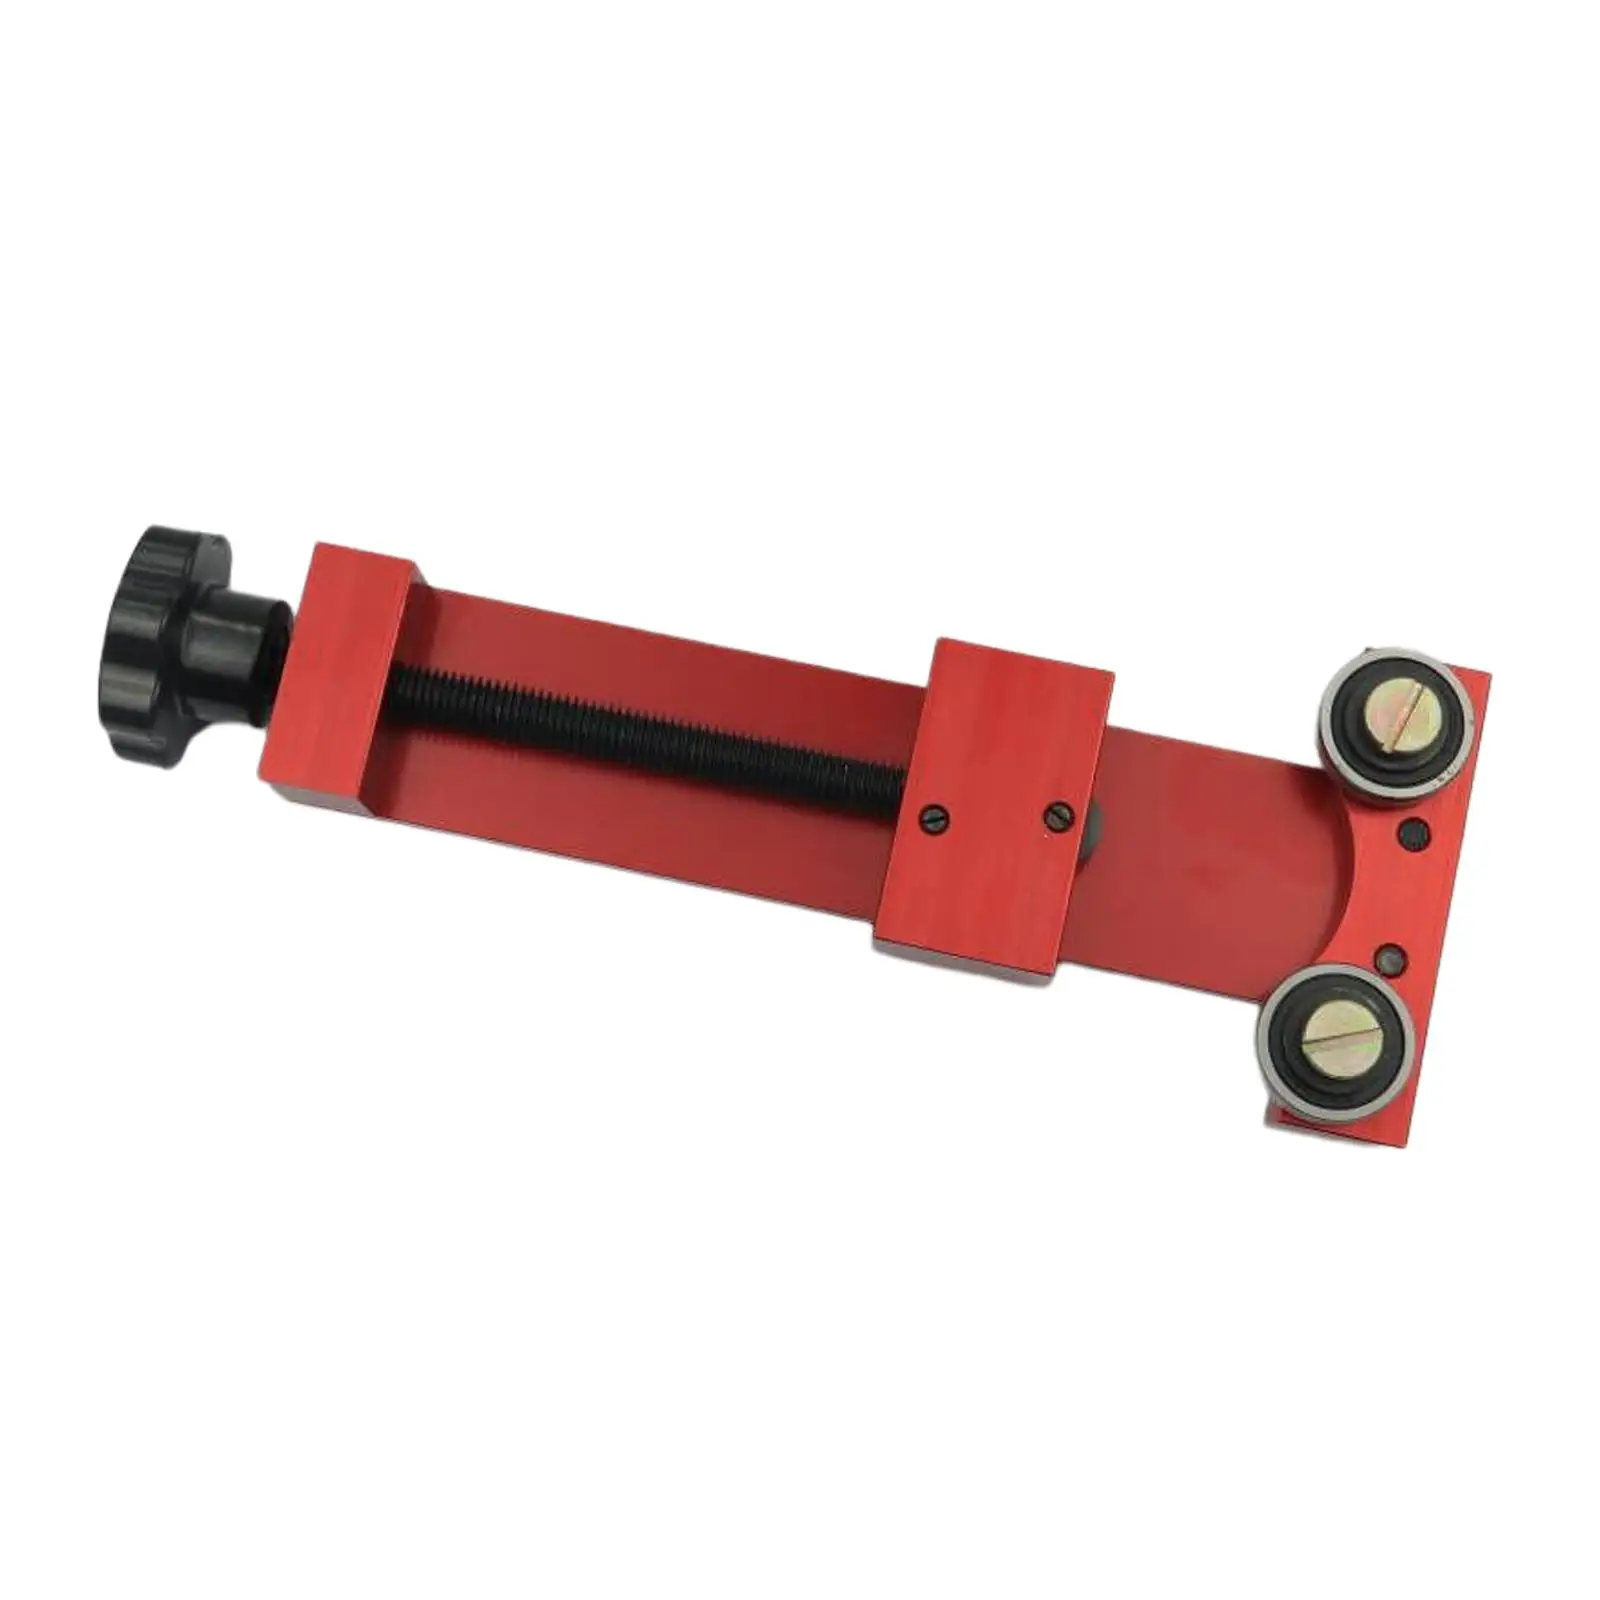 Oil Filter Cutter 66490 Red Attachment Accessories for Oil Filter